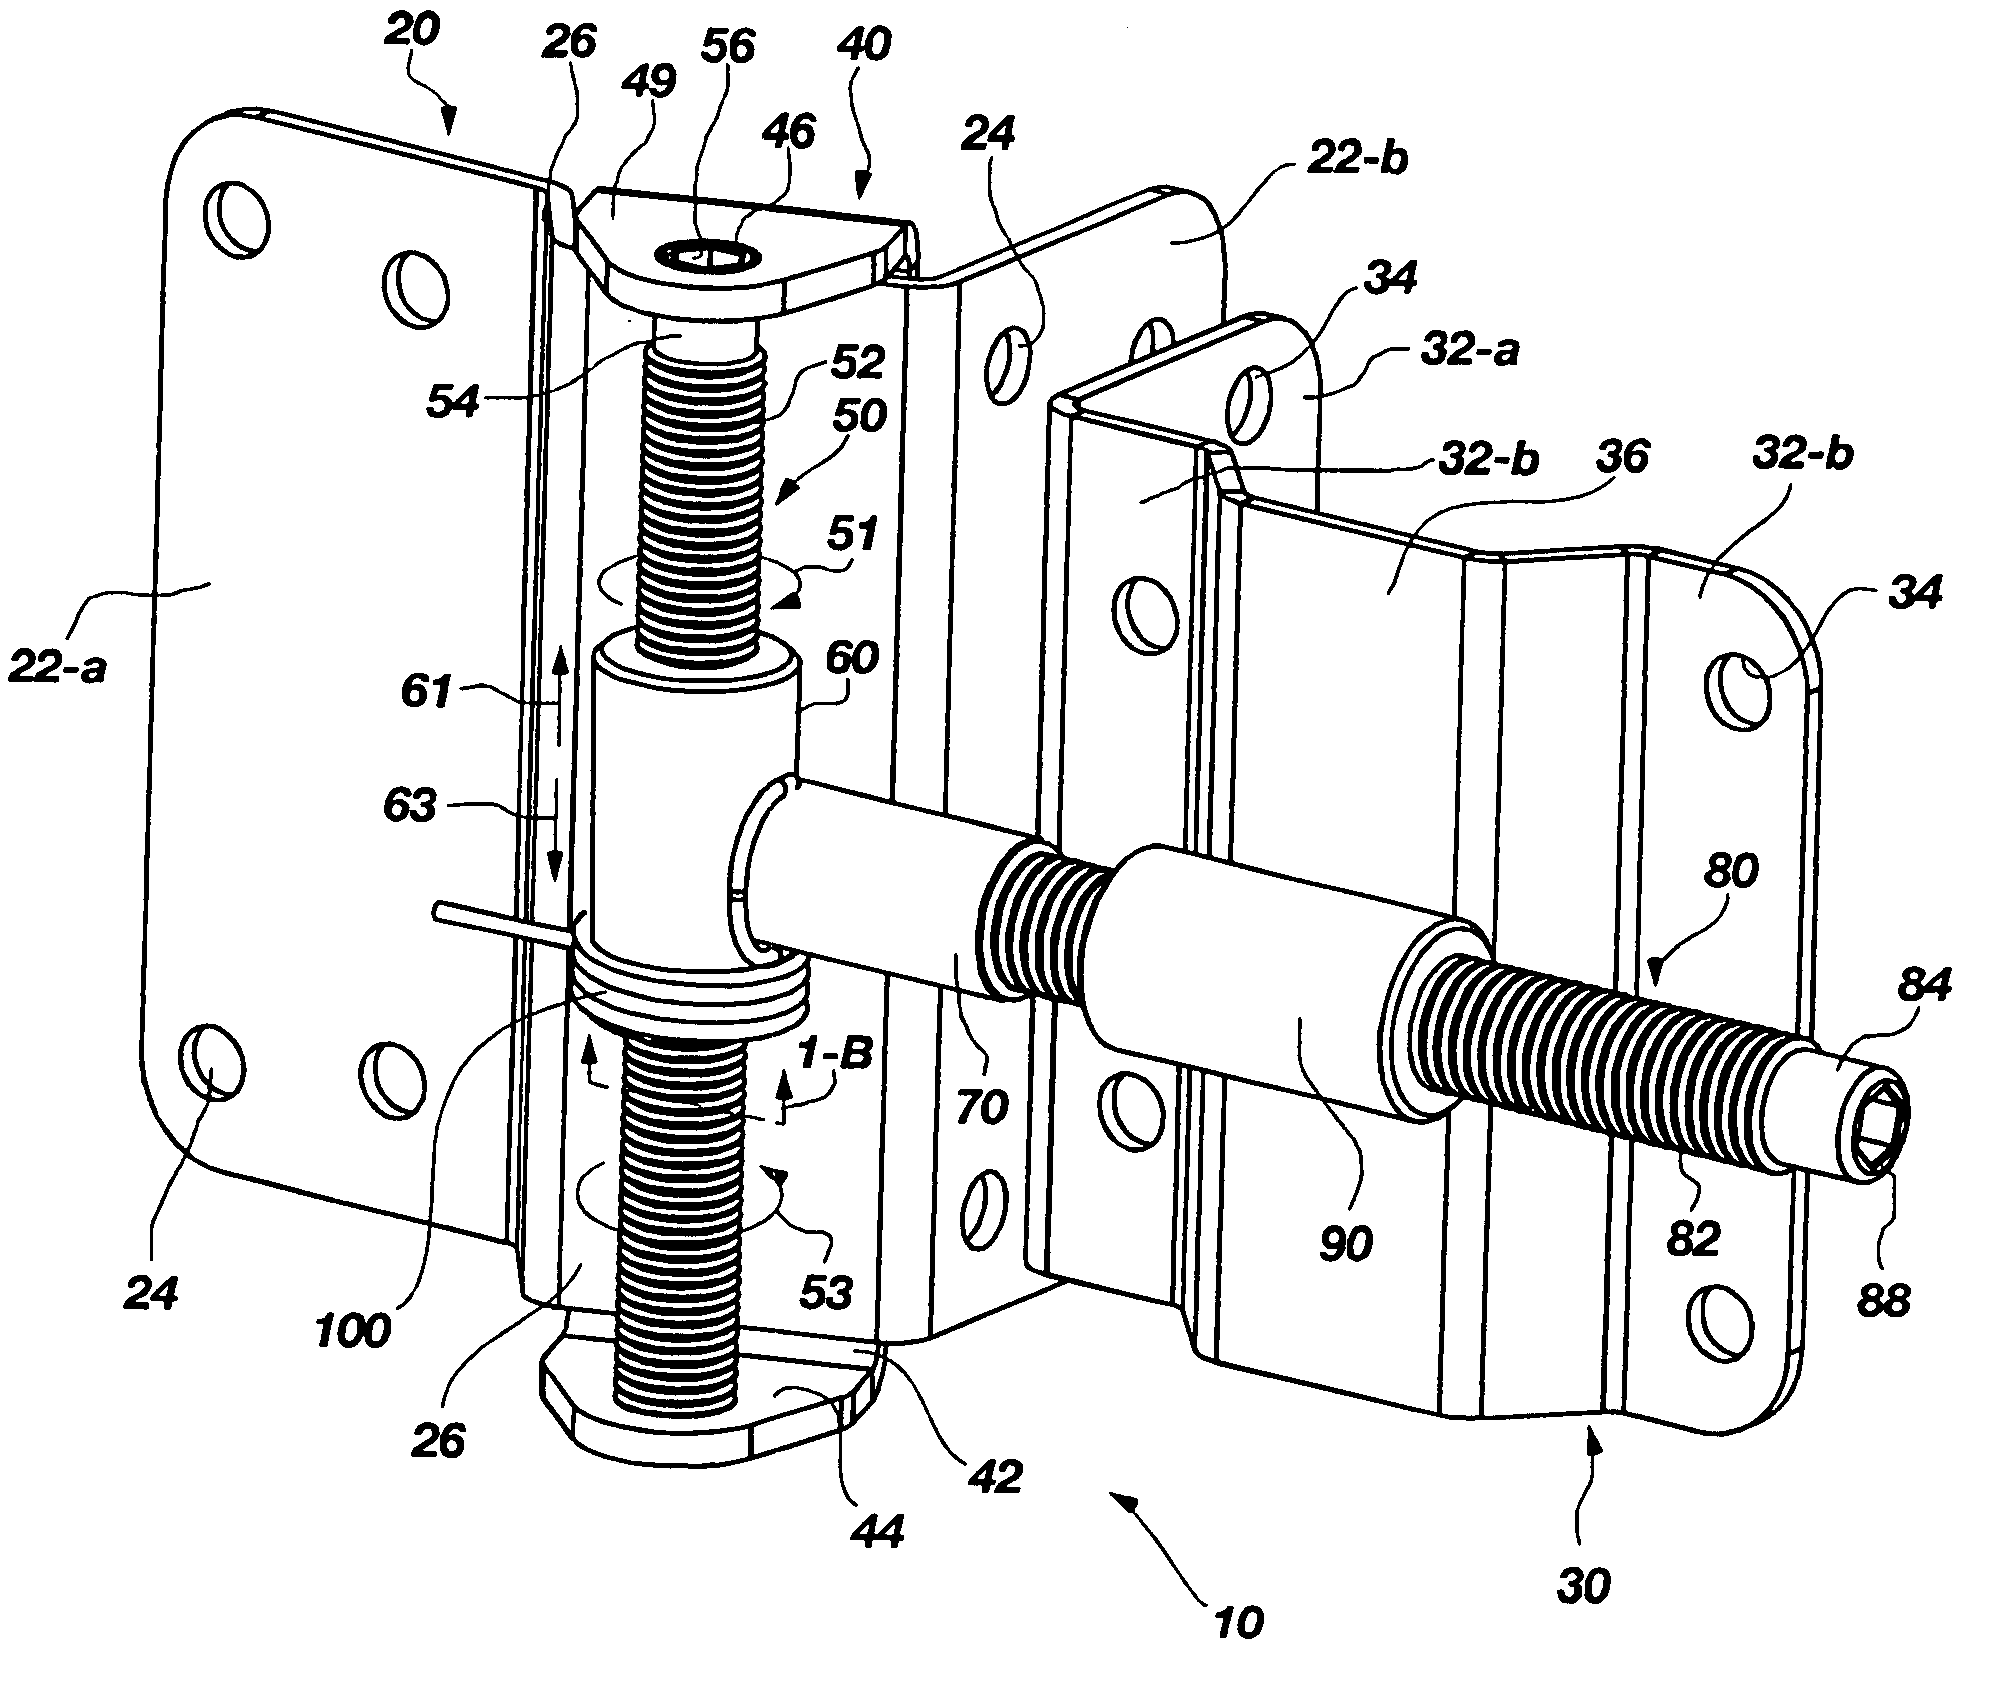 Vertical and horizontal adjustable hinge assembly